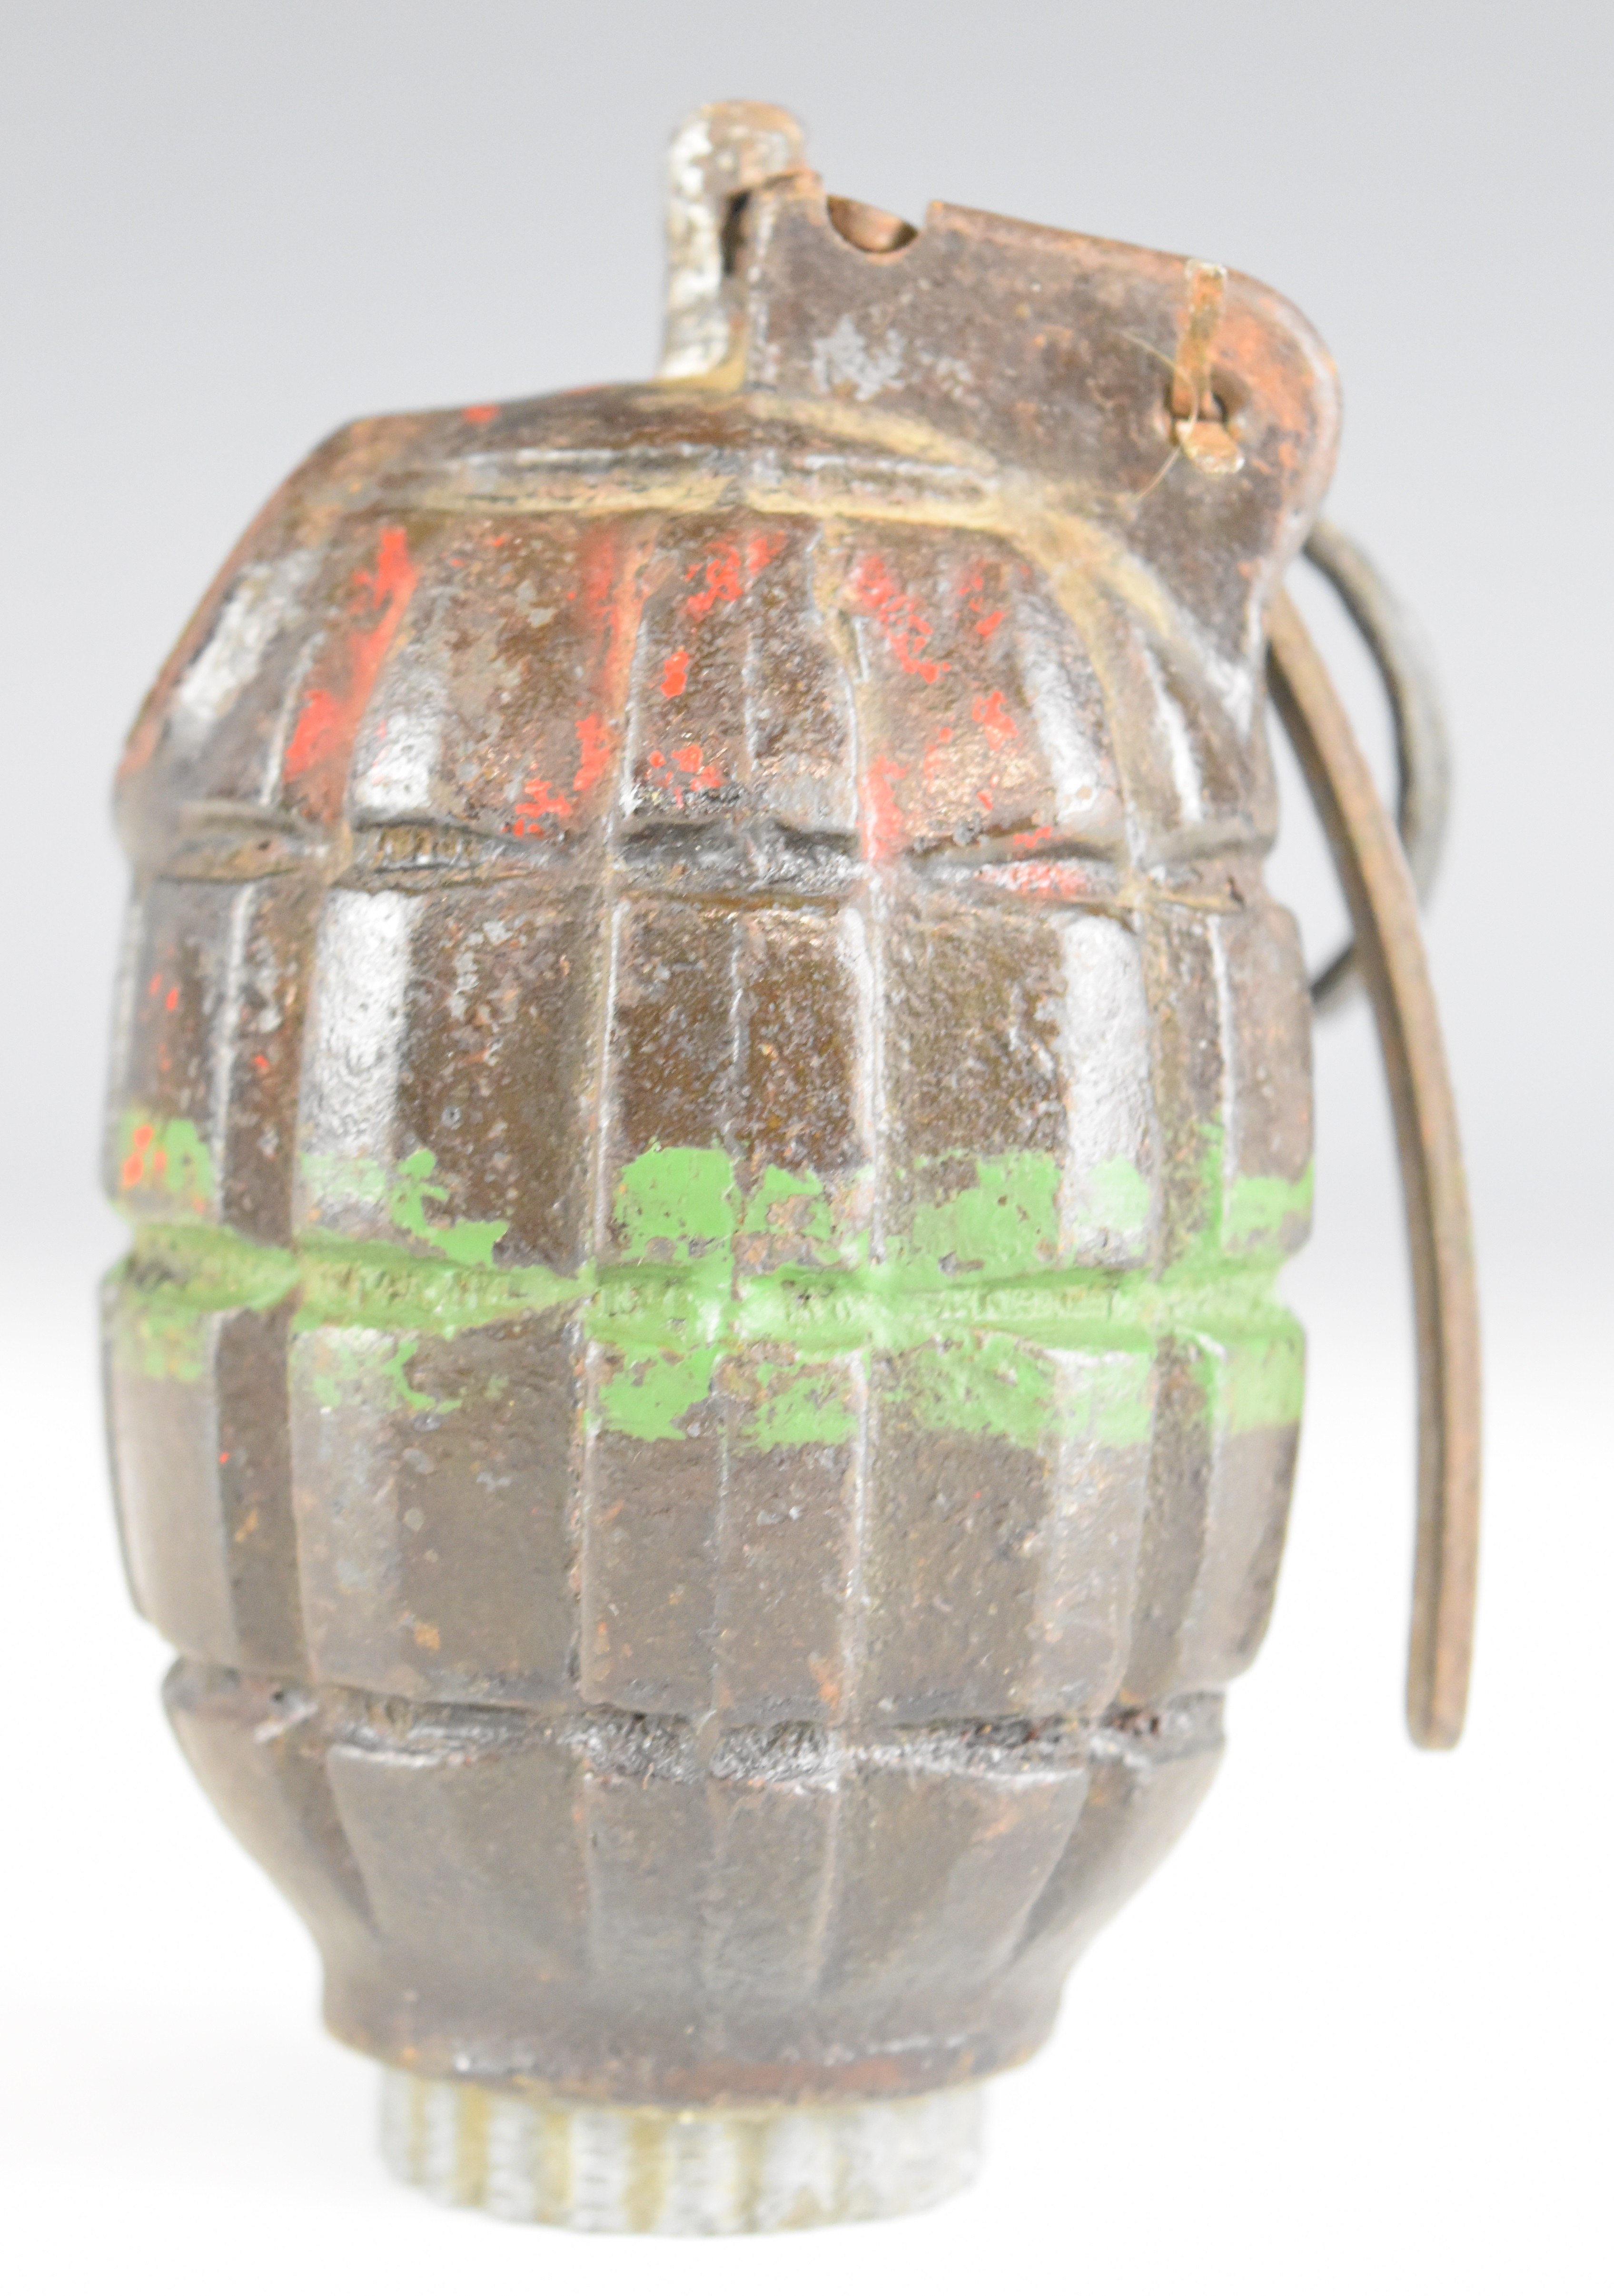 British WW2 inert Mills bomb / grenade stamped No 6 MZ MK I and SRD to alloy screw in base - Image 9 of 10